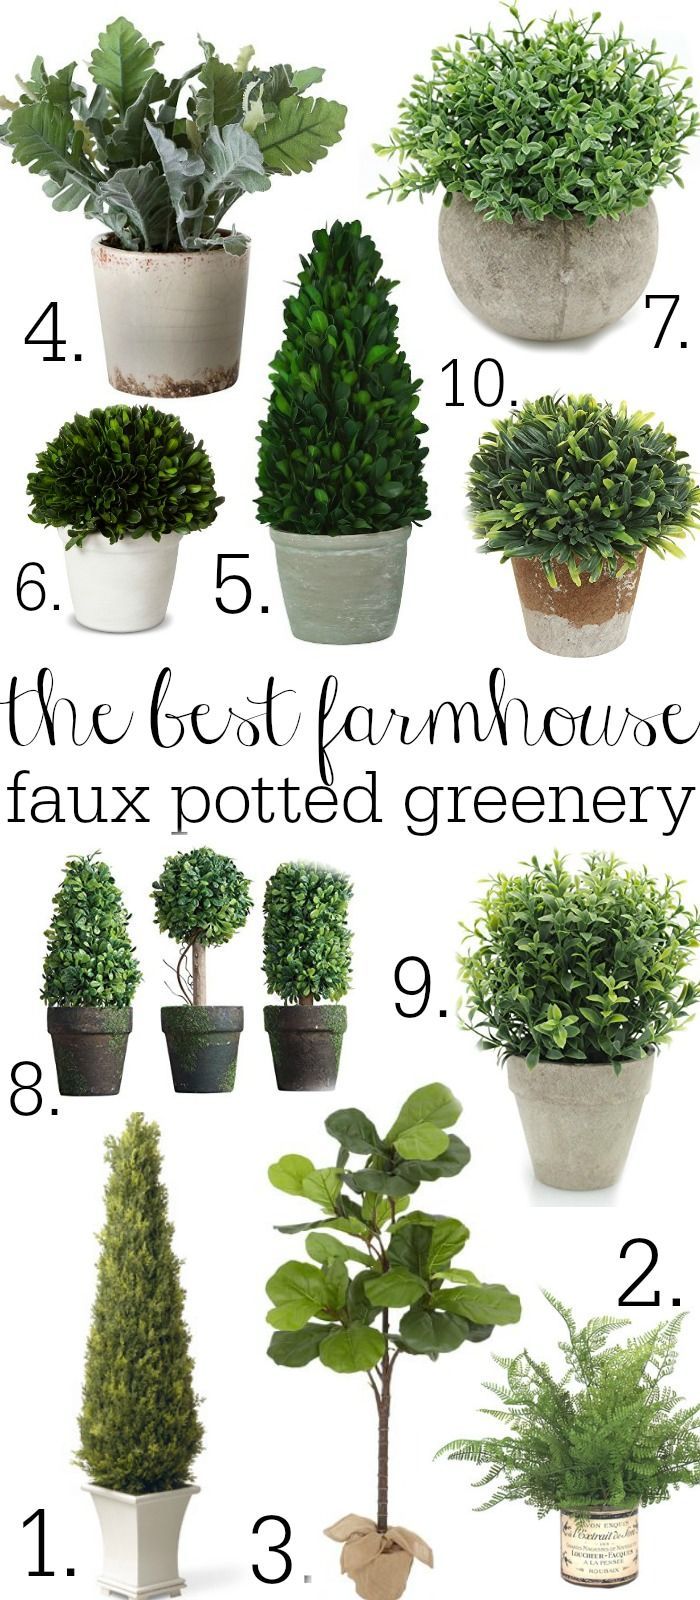 The Best farmhouse faux potted greenery – A great source for faux potted plants! A must pin!